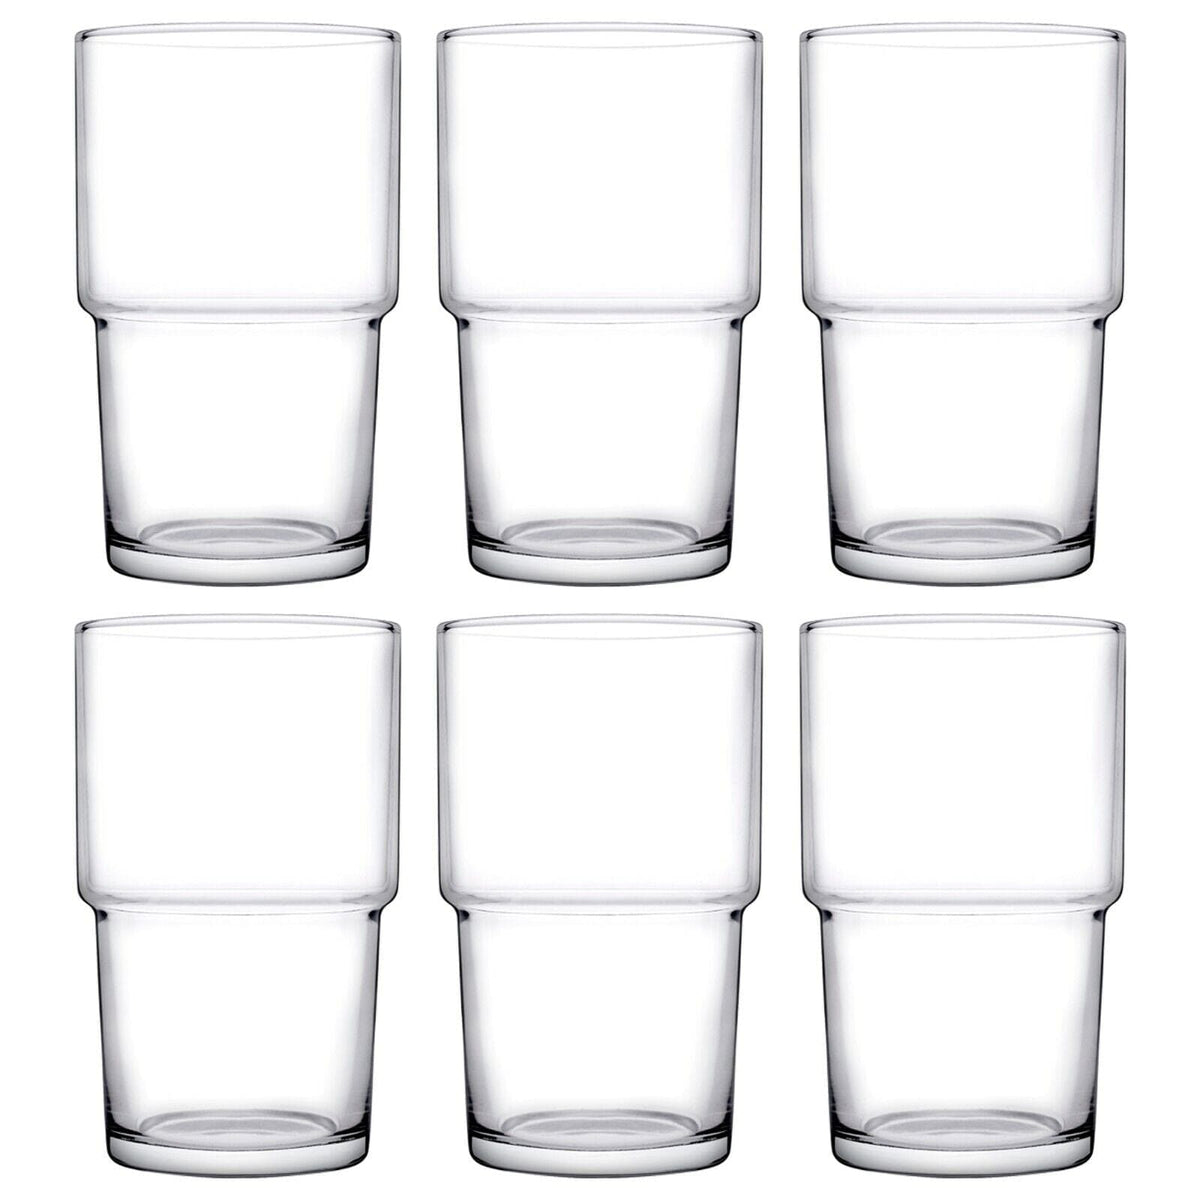 HILL COCKTAIL GLASS (set of 6)